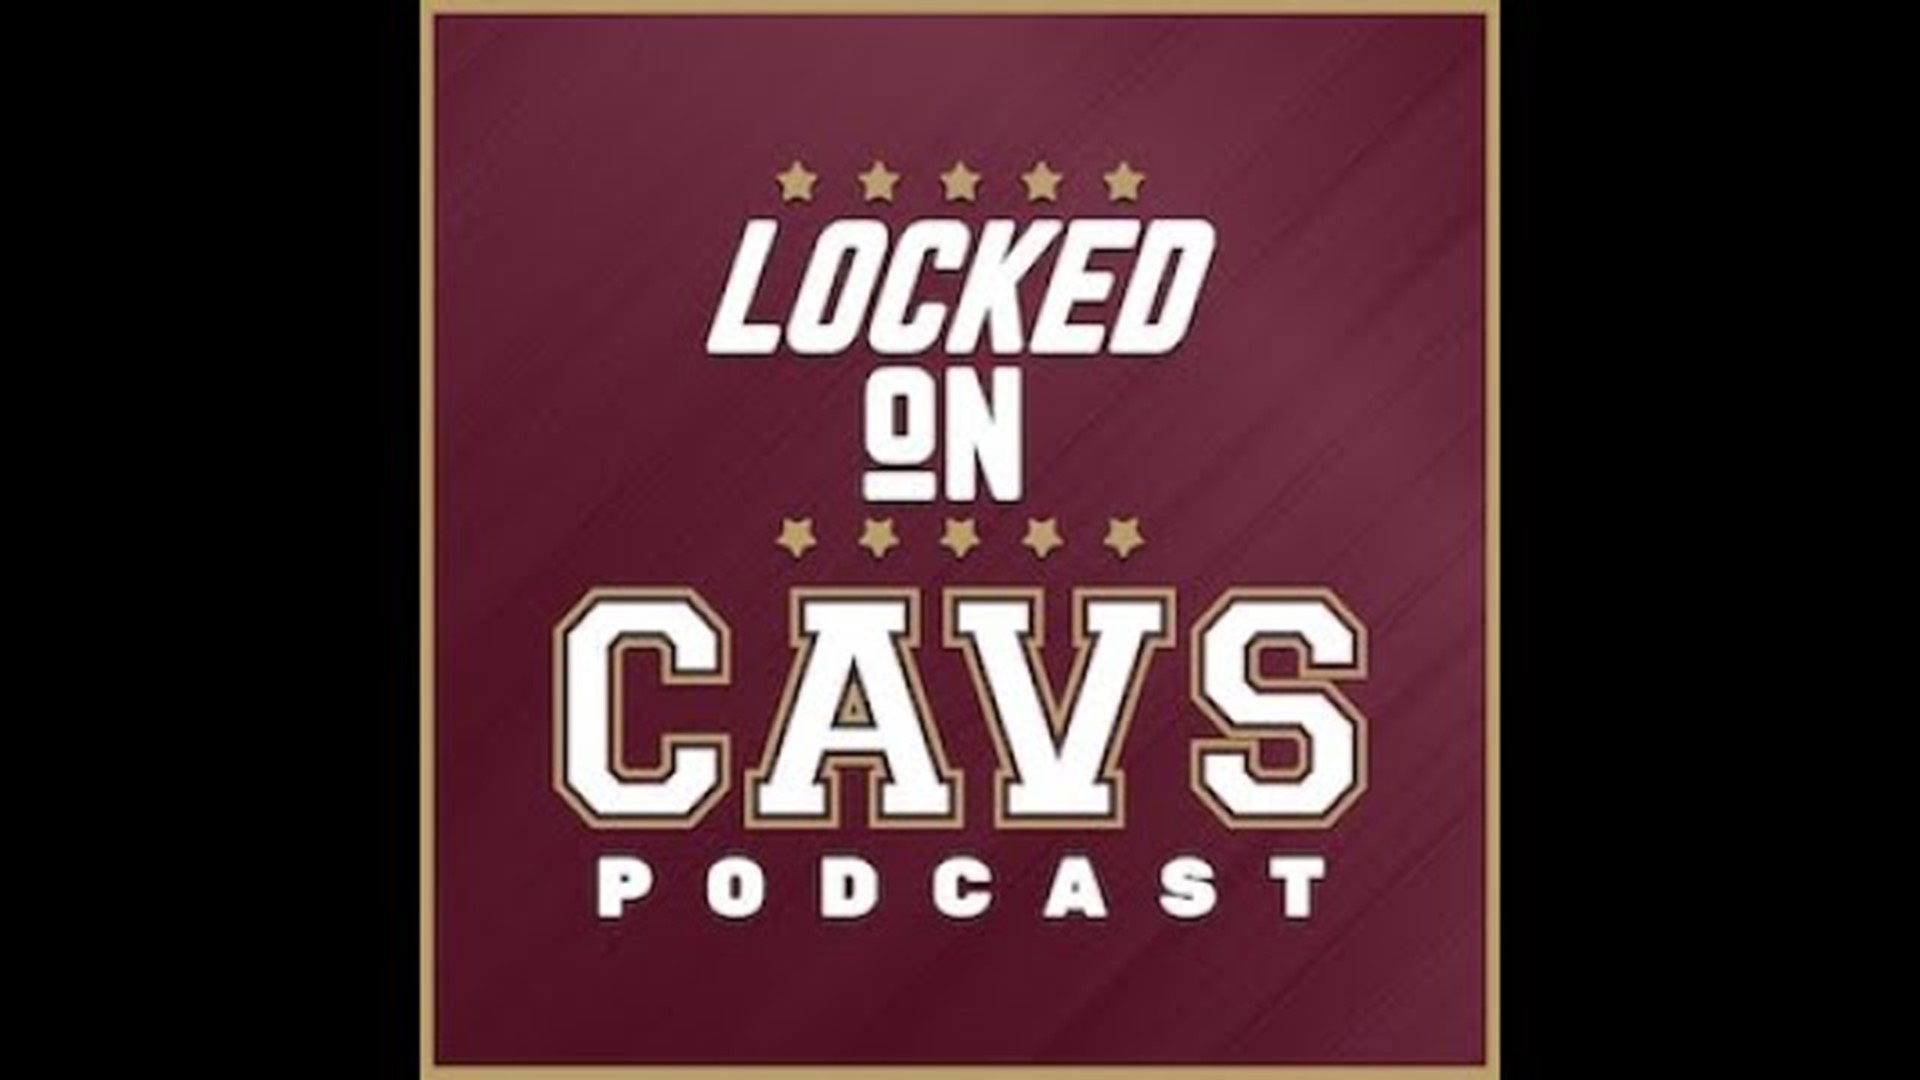 Hosts Chris Manning and Evan Dammarell recap the Cavs win over the suns, game awards and some light trade talk.